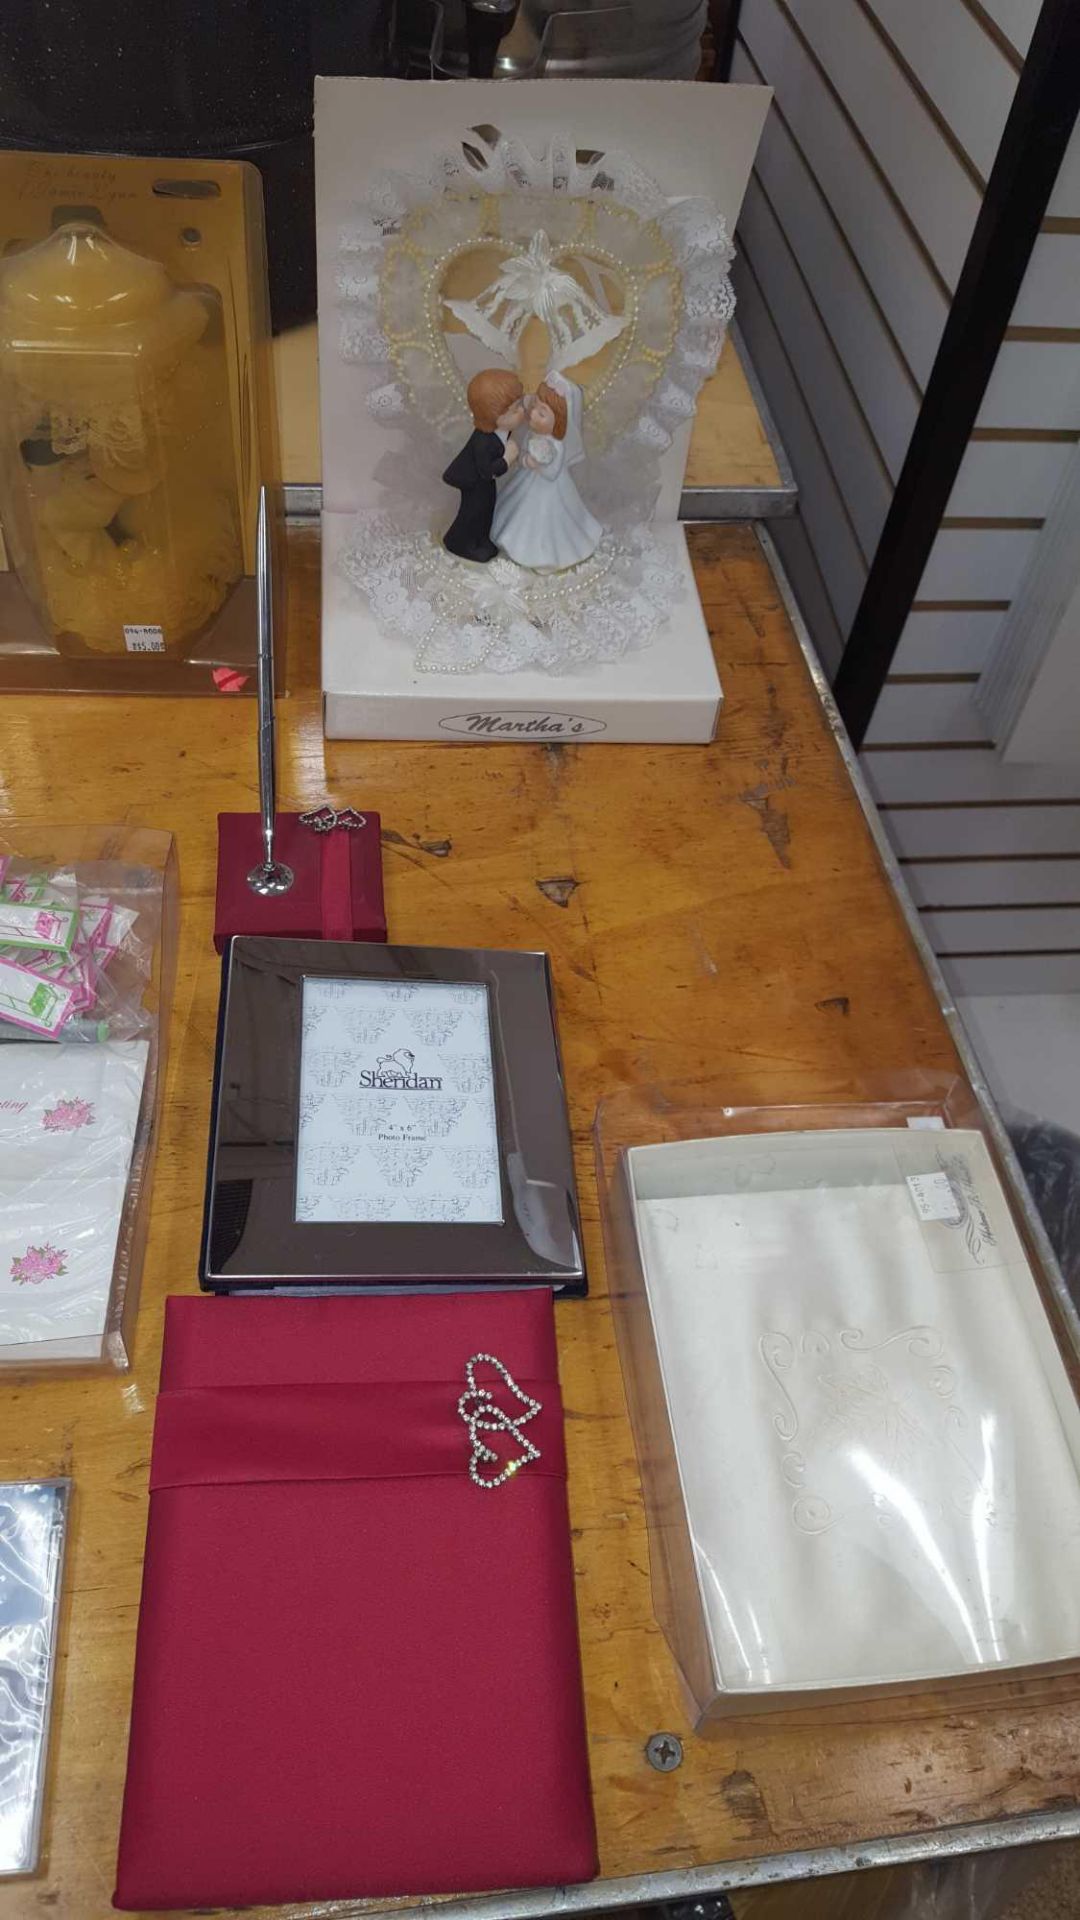 Lot of asst wedding retail glassware, figurines and pillows etc - Image 9 of 9